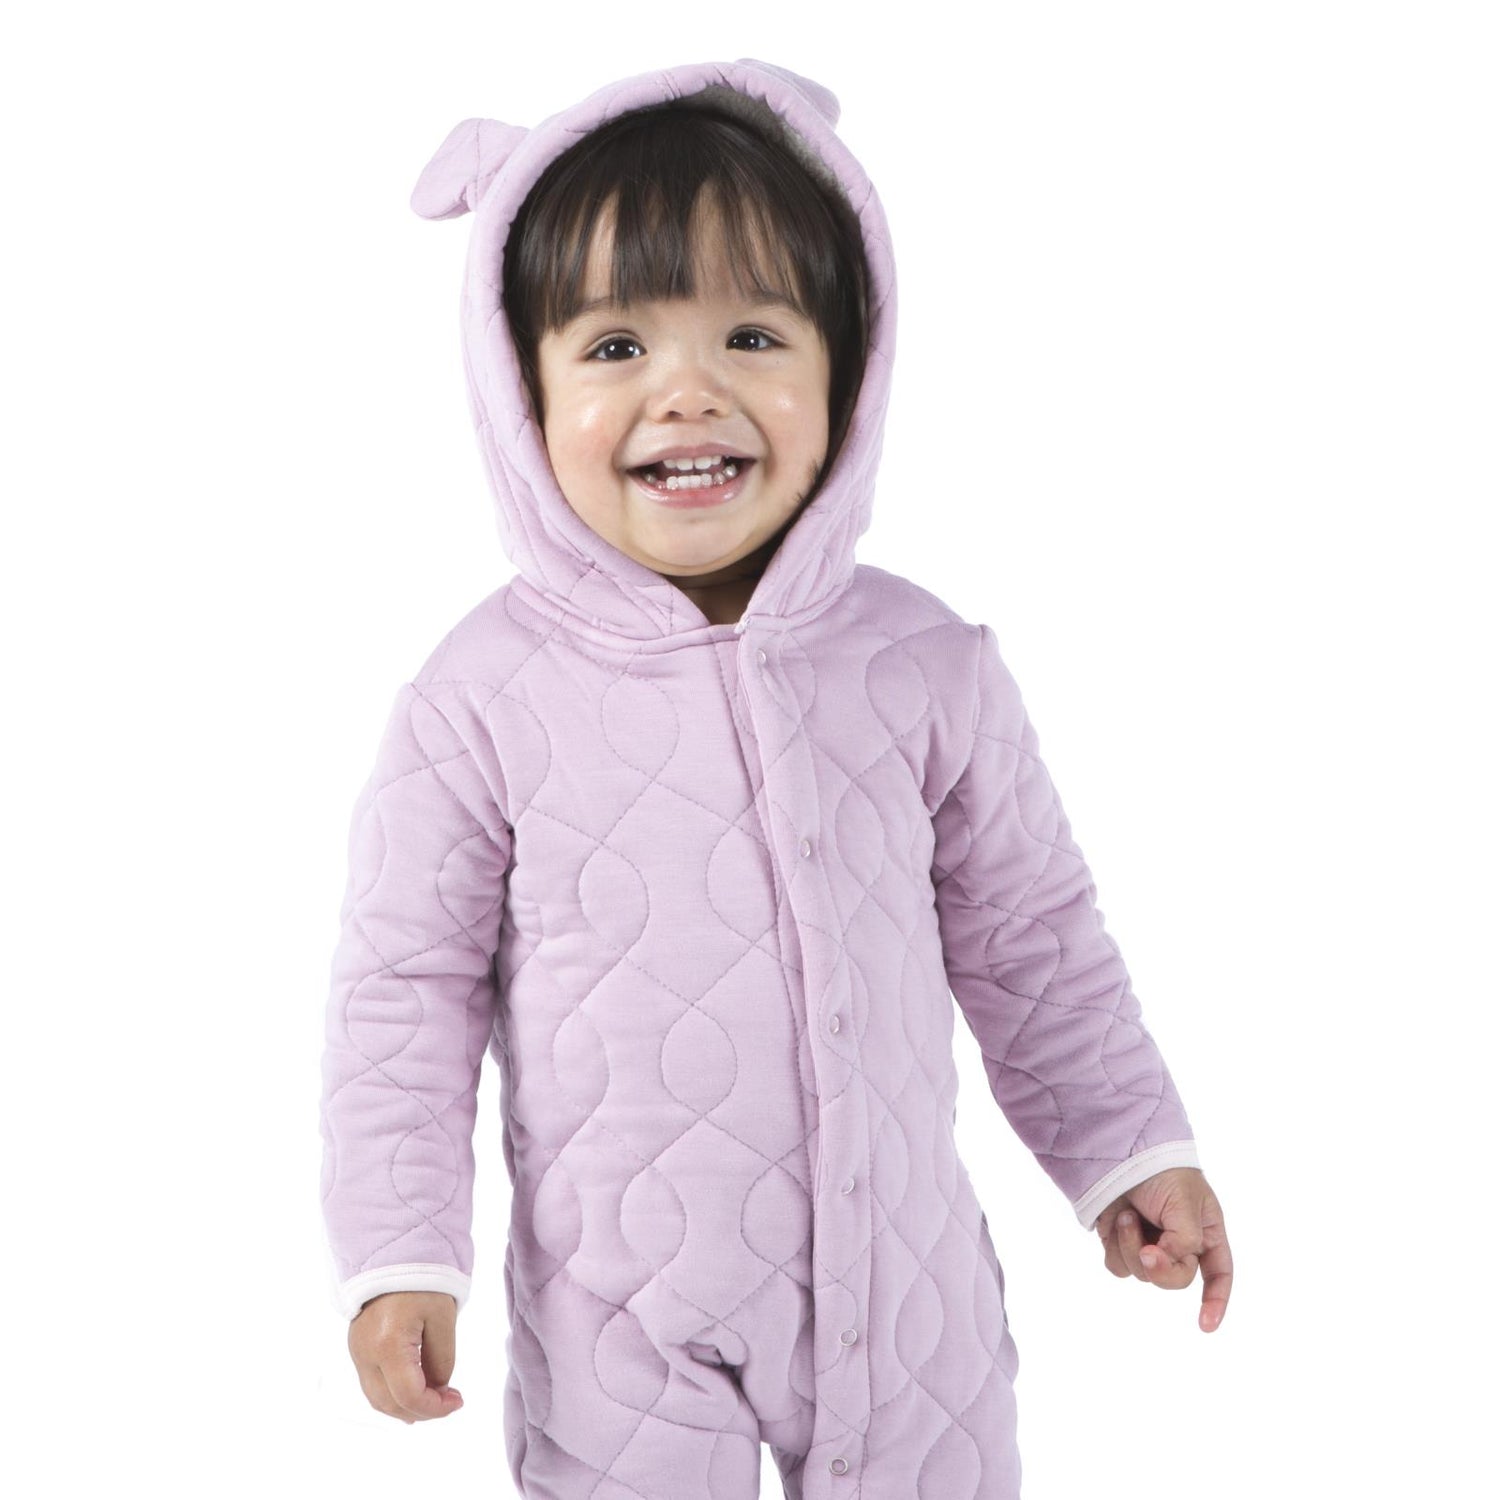 Quilted Hoodie Coverall with Sherpa-Lined Hood in Sweet Pea with Macaroon Trim